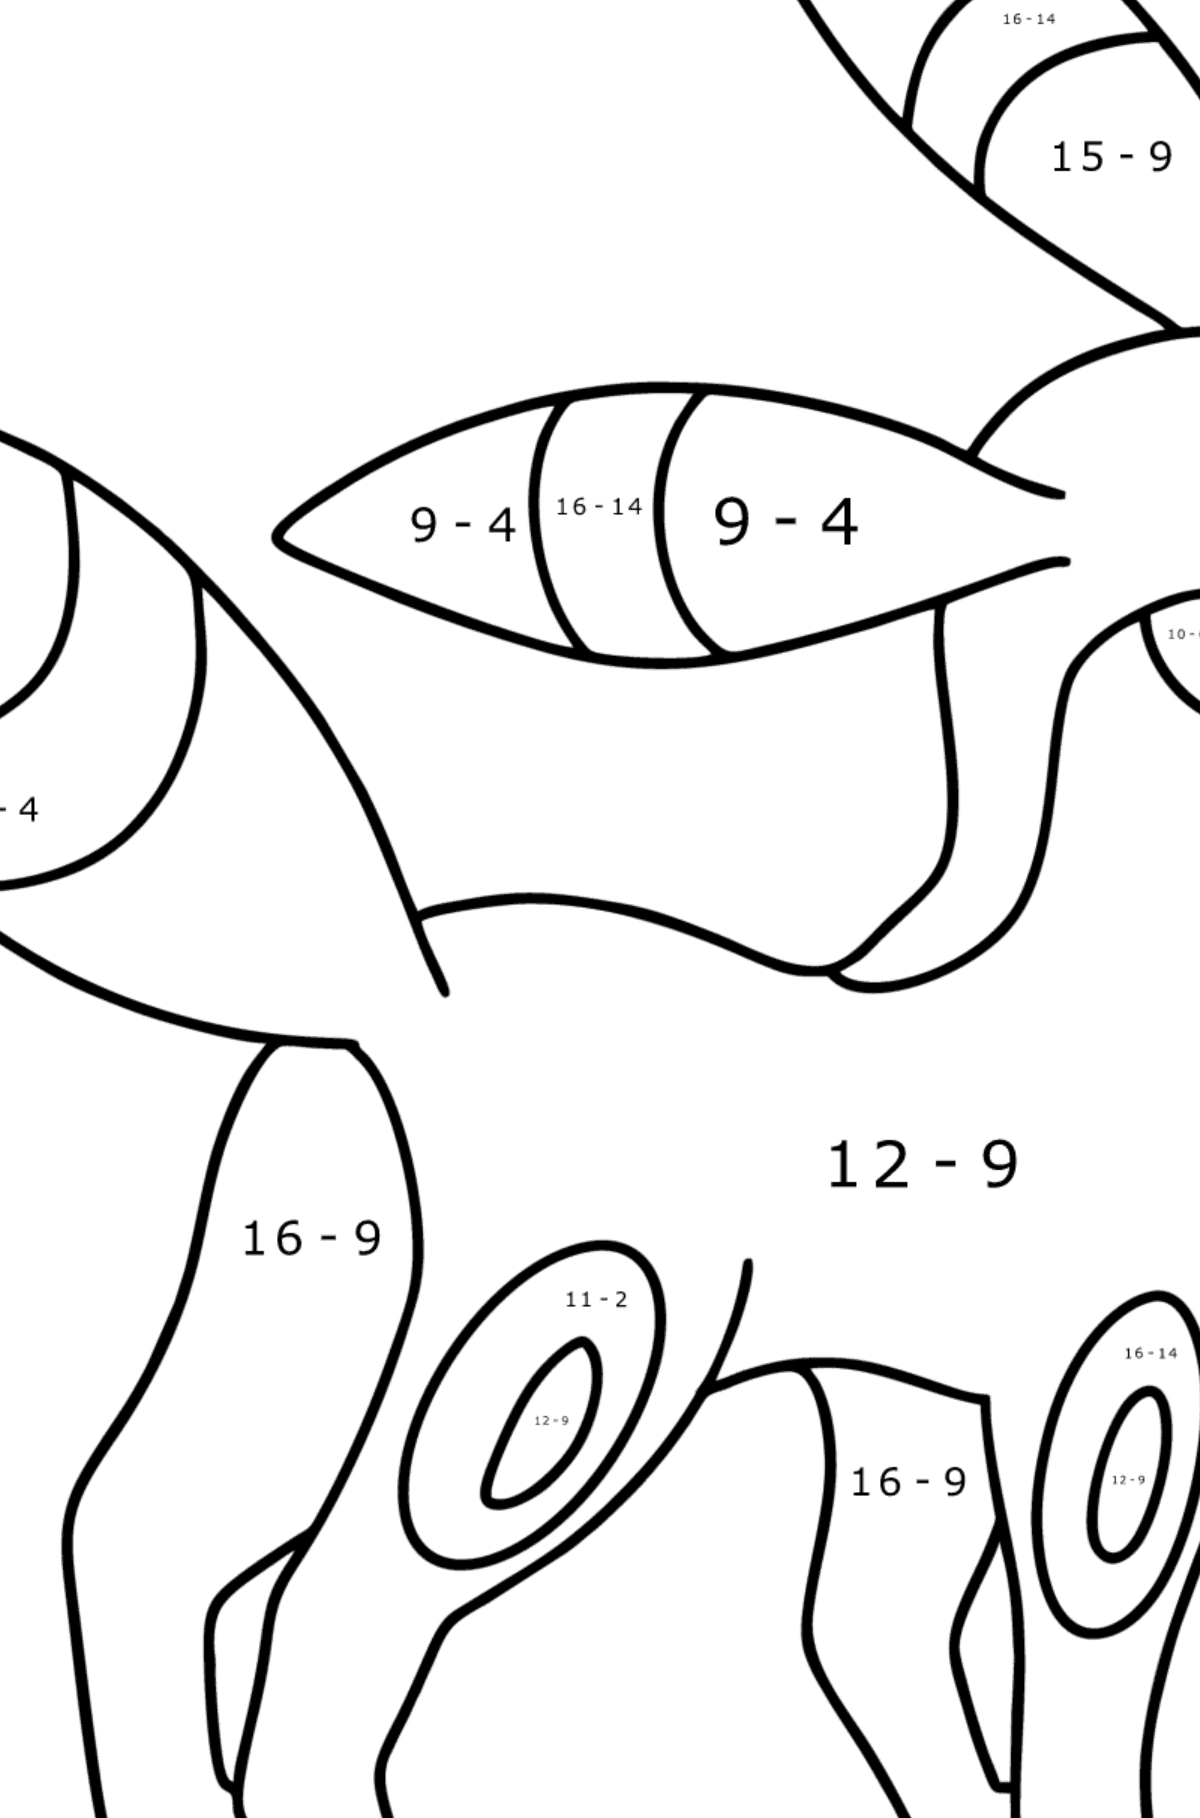 Coloring page Pokemon Go Umbreon - Math Coloring - Subtraction for Kids